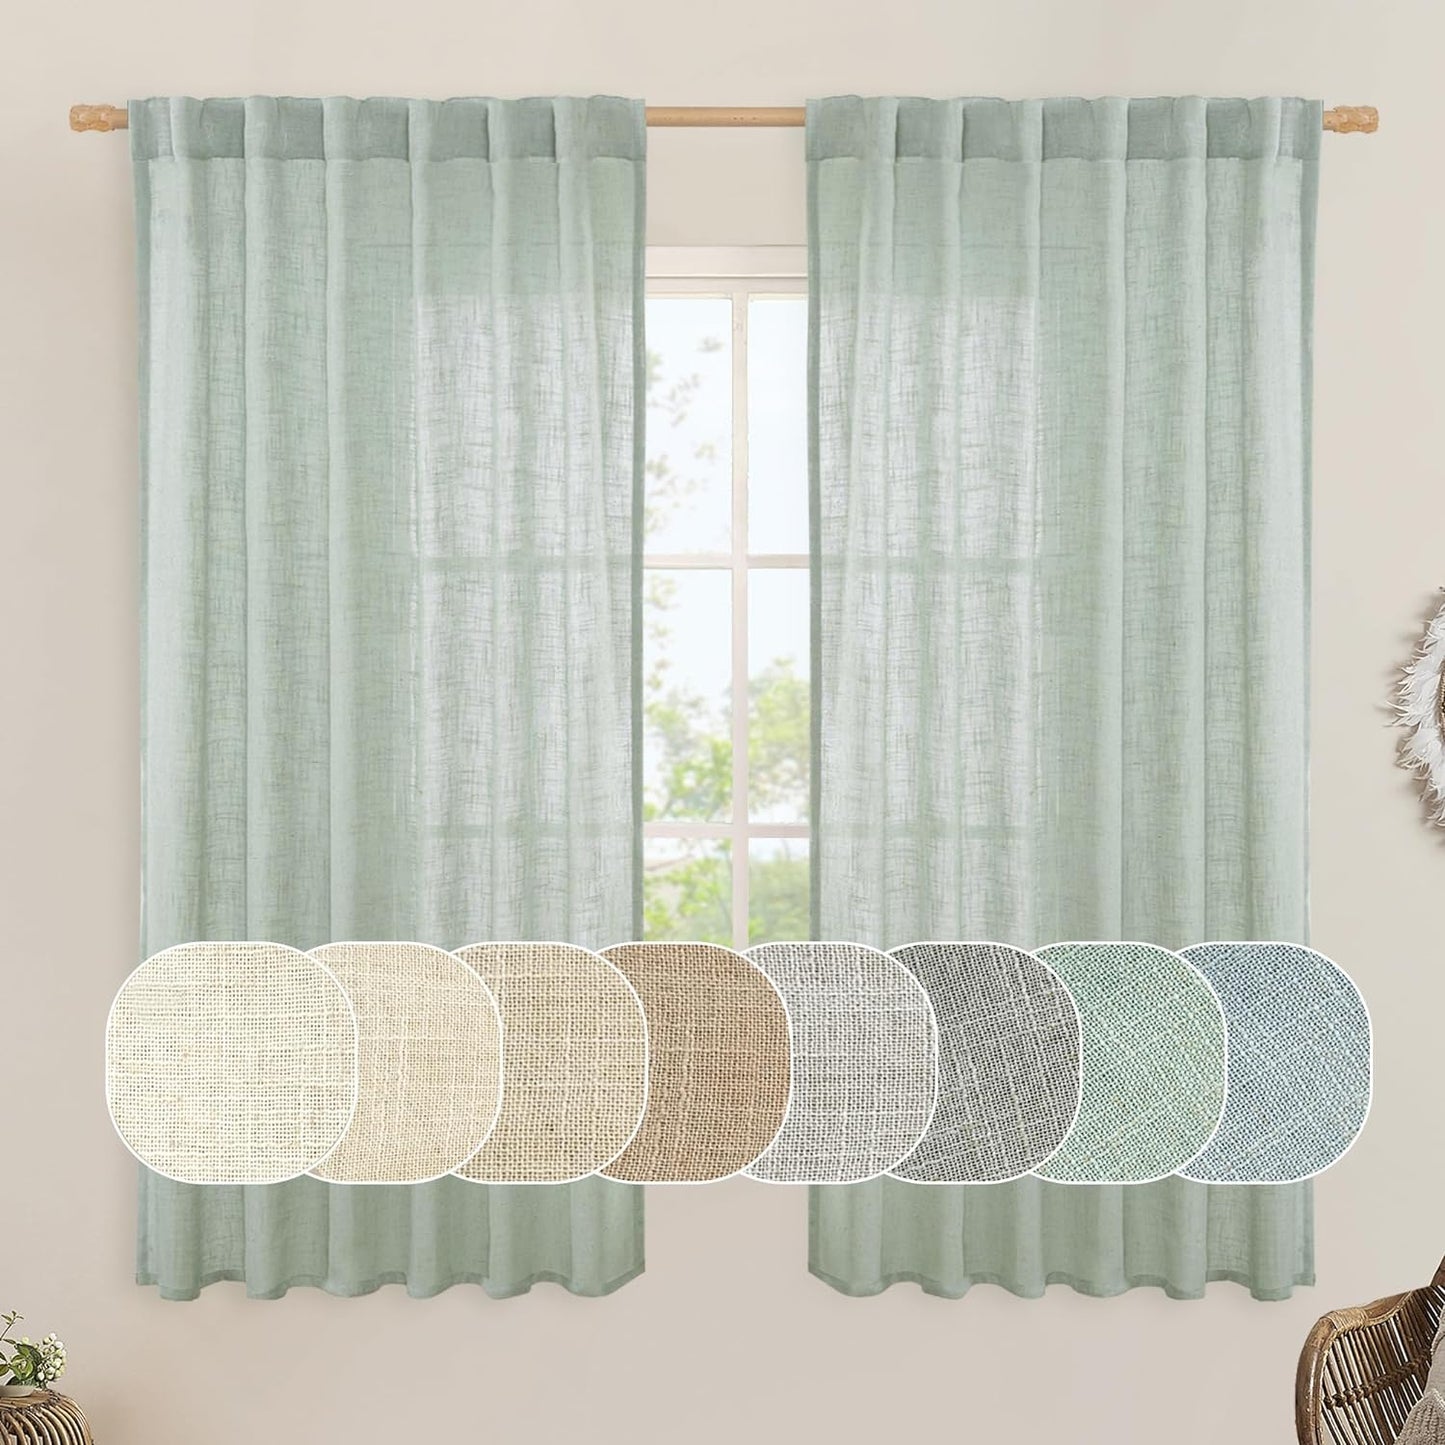 LAMIT Natural Linen Blended Curtains for Living Room, Back Tab and Rod Pocket Semi Sheer Curtains Light Filtering Country Rustic Drapes for Bedroom/Farmhouse, 2 Panels,52 X 108 Inch, Linen  LAMIT Light Sage 52W X 63L 